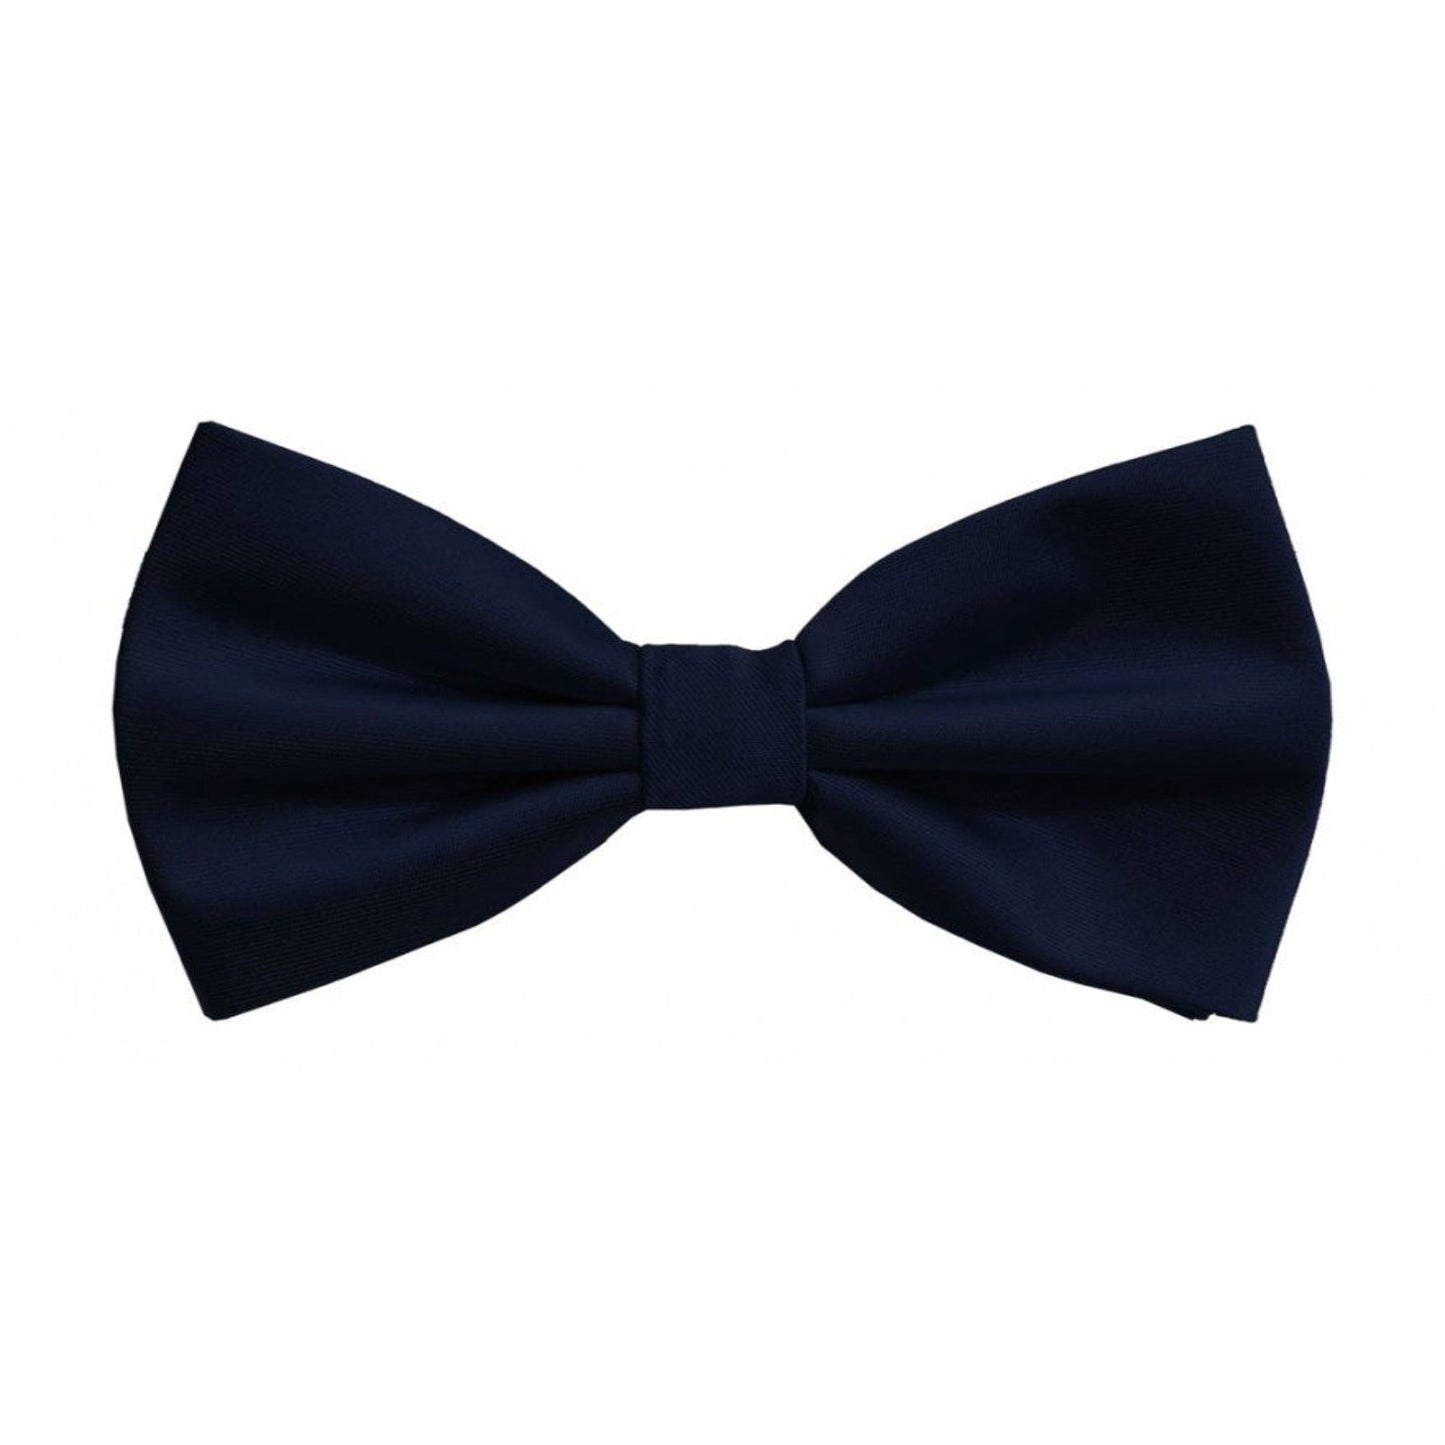 Classic Dark Navy Bowtie With Matching Pocket Square | KCT Menswear 